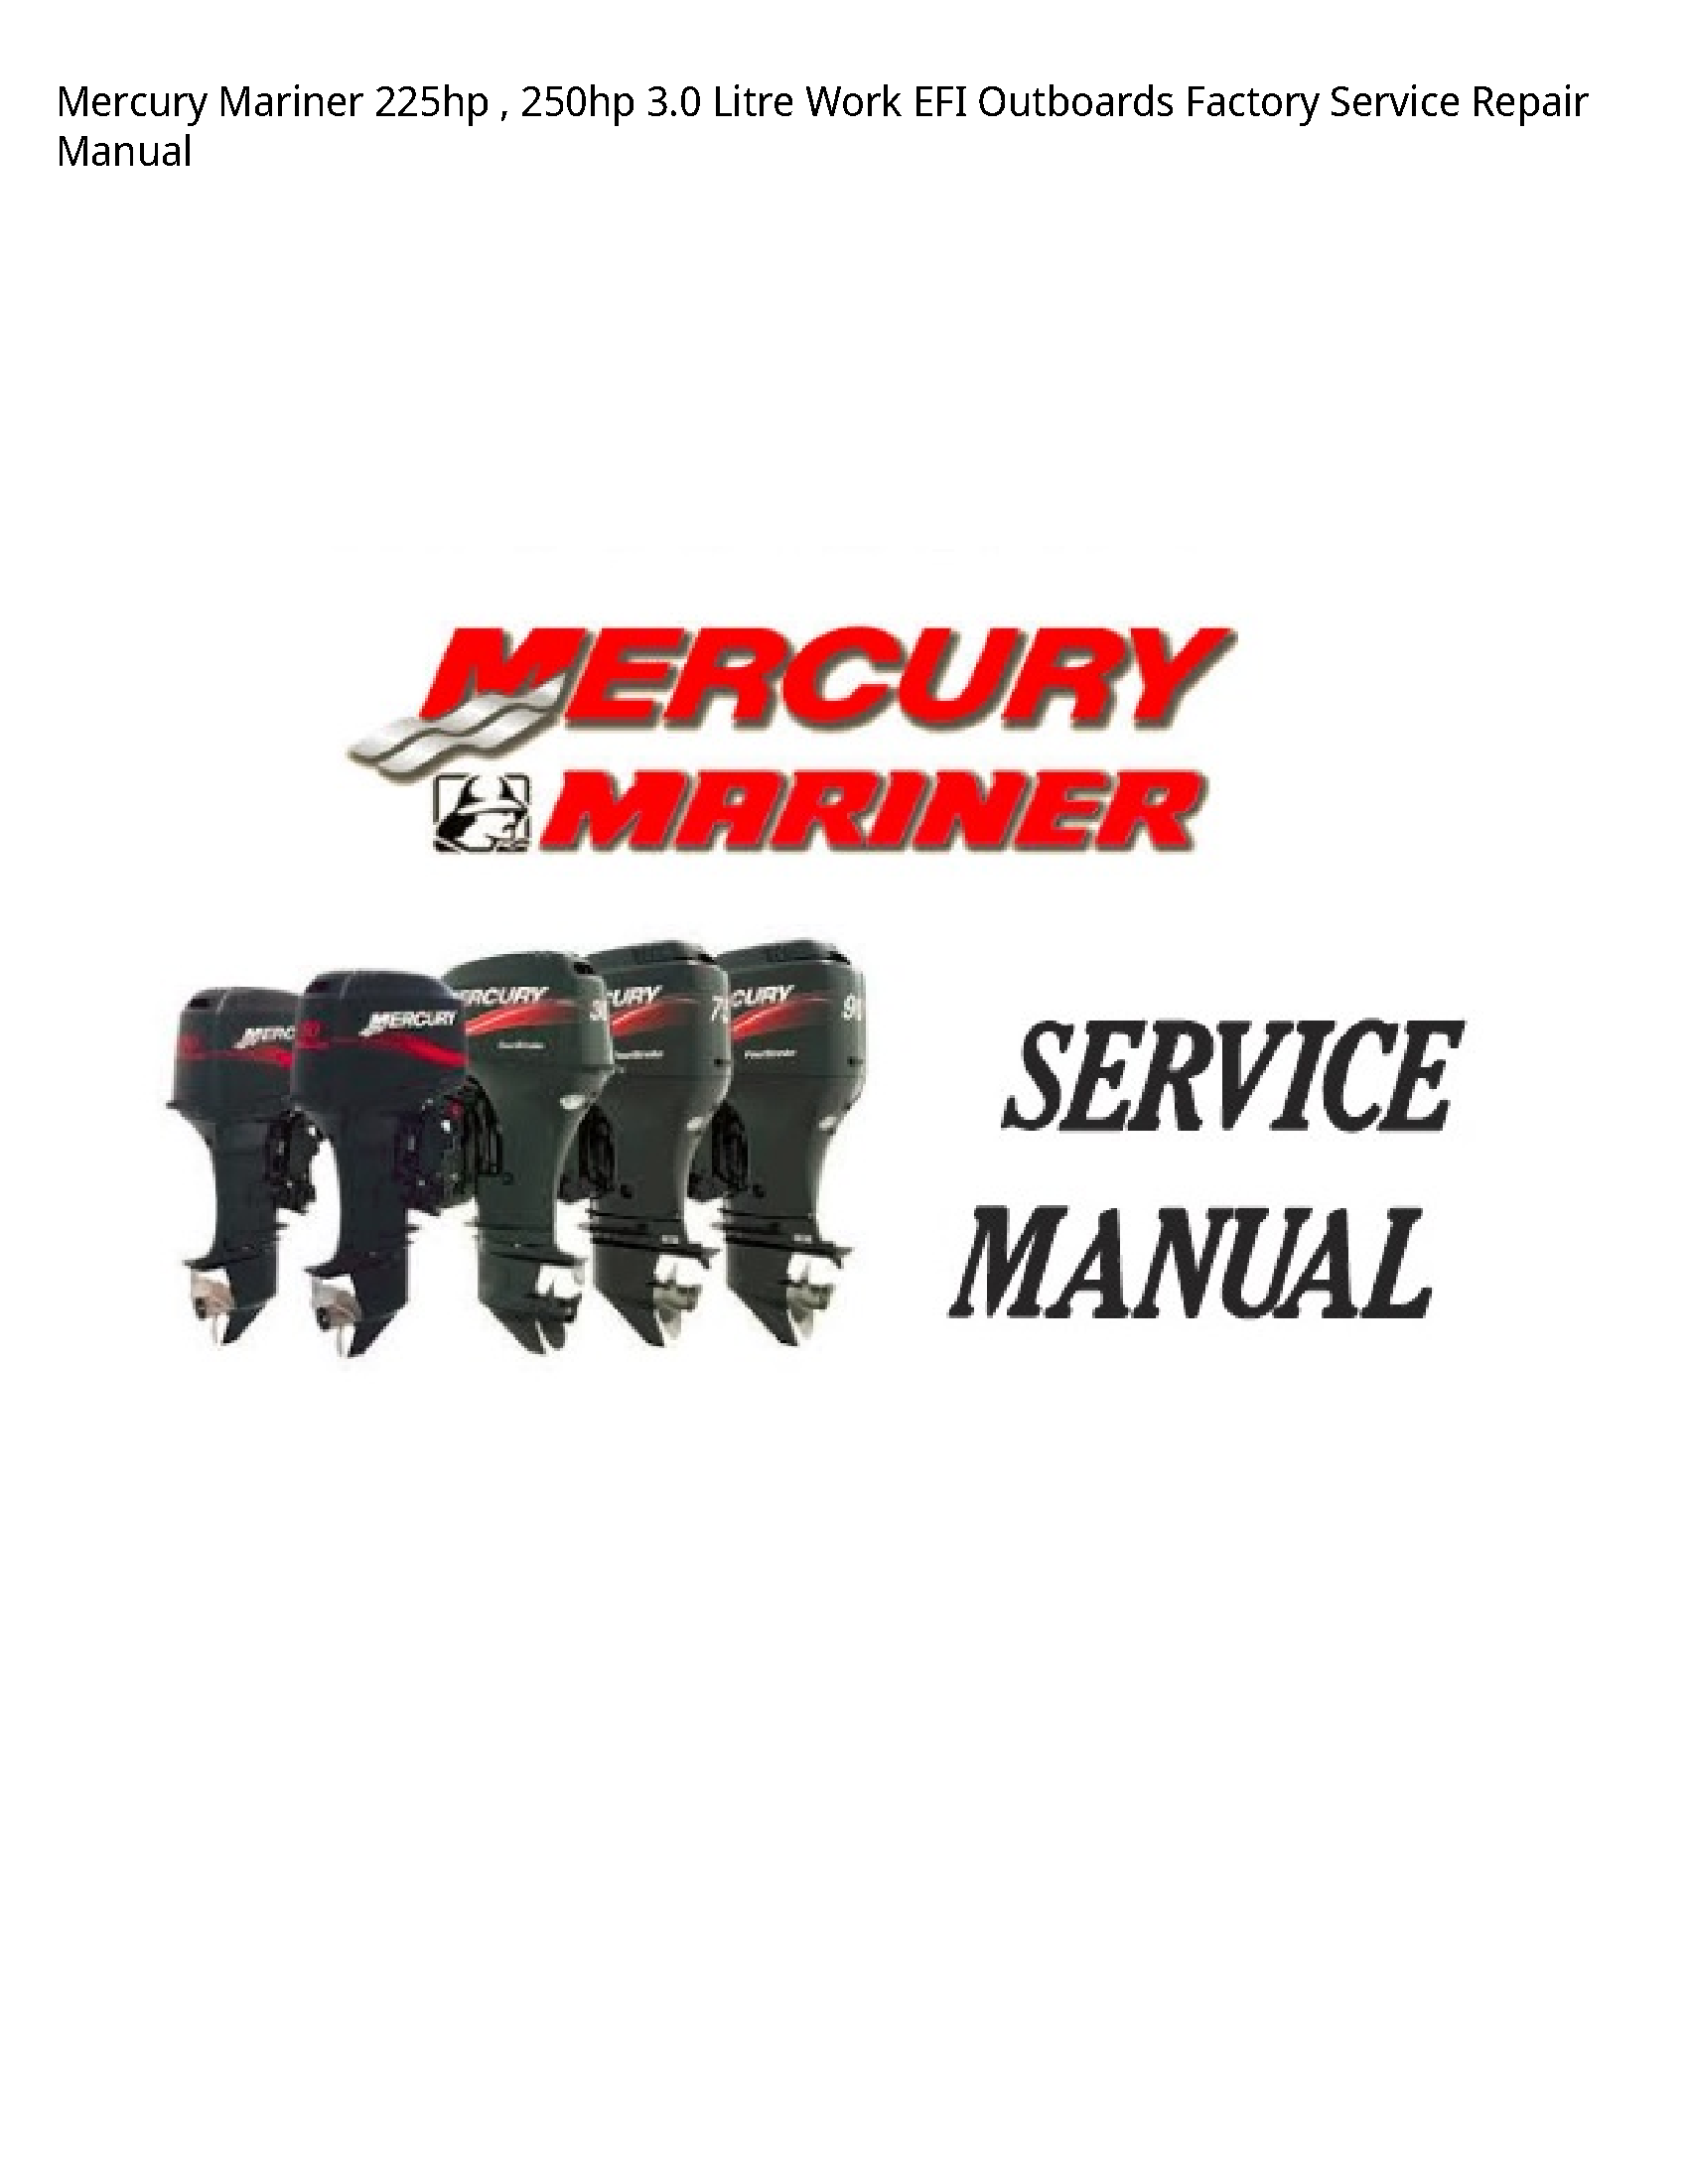 Mercury Mariner 225hp Litre Work EFI Outboards Factory manual